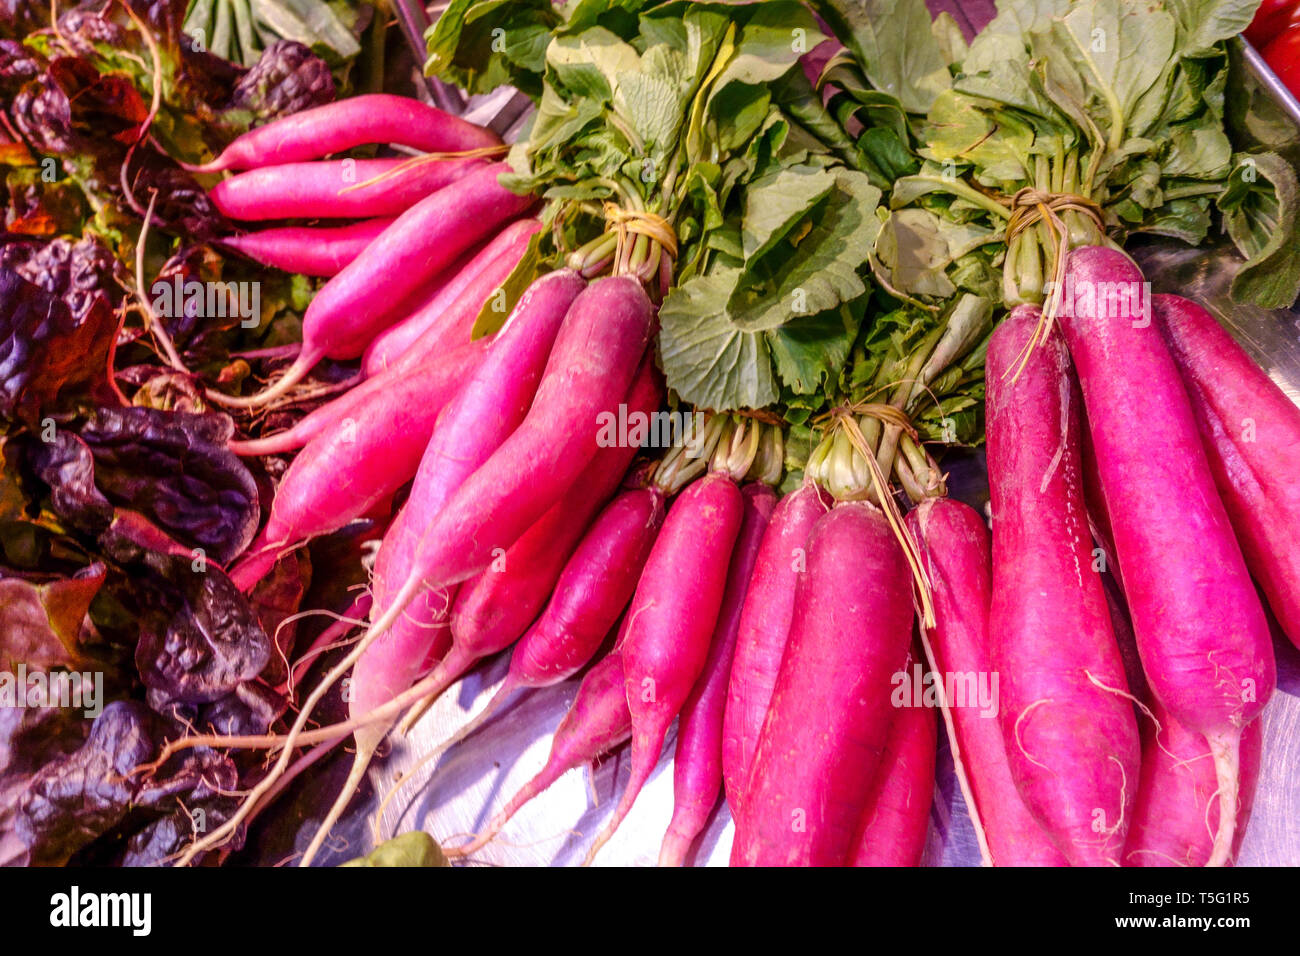 Bunch of red radishes roots on the vegetable market, Spain Radish roots Stock Photo